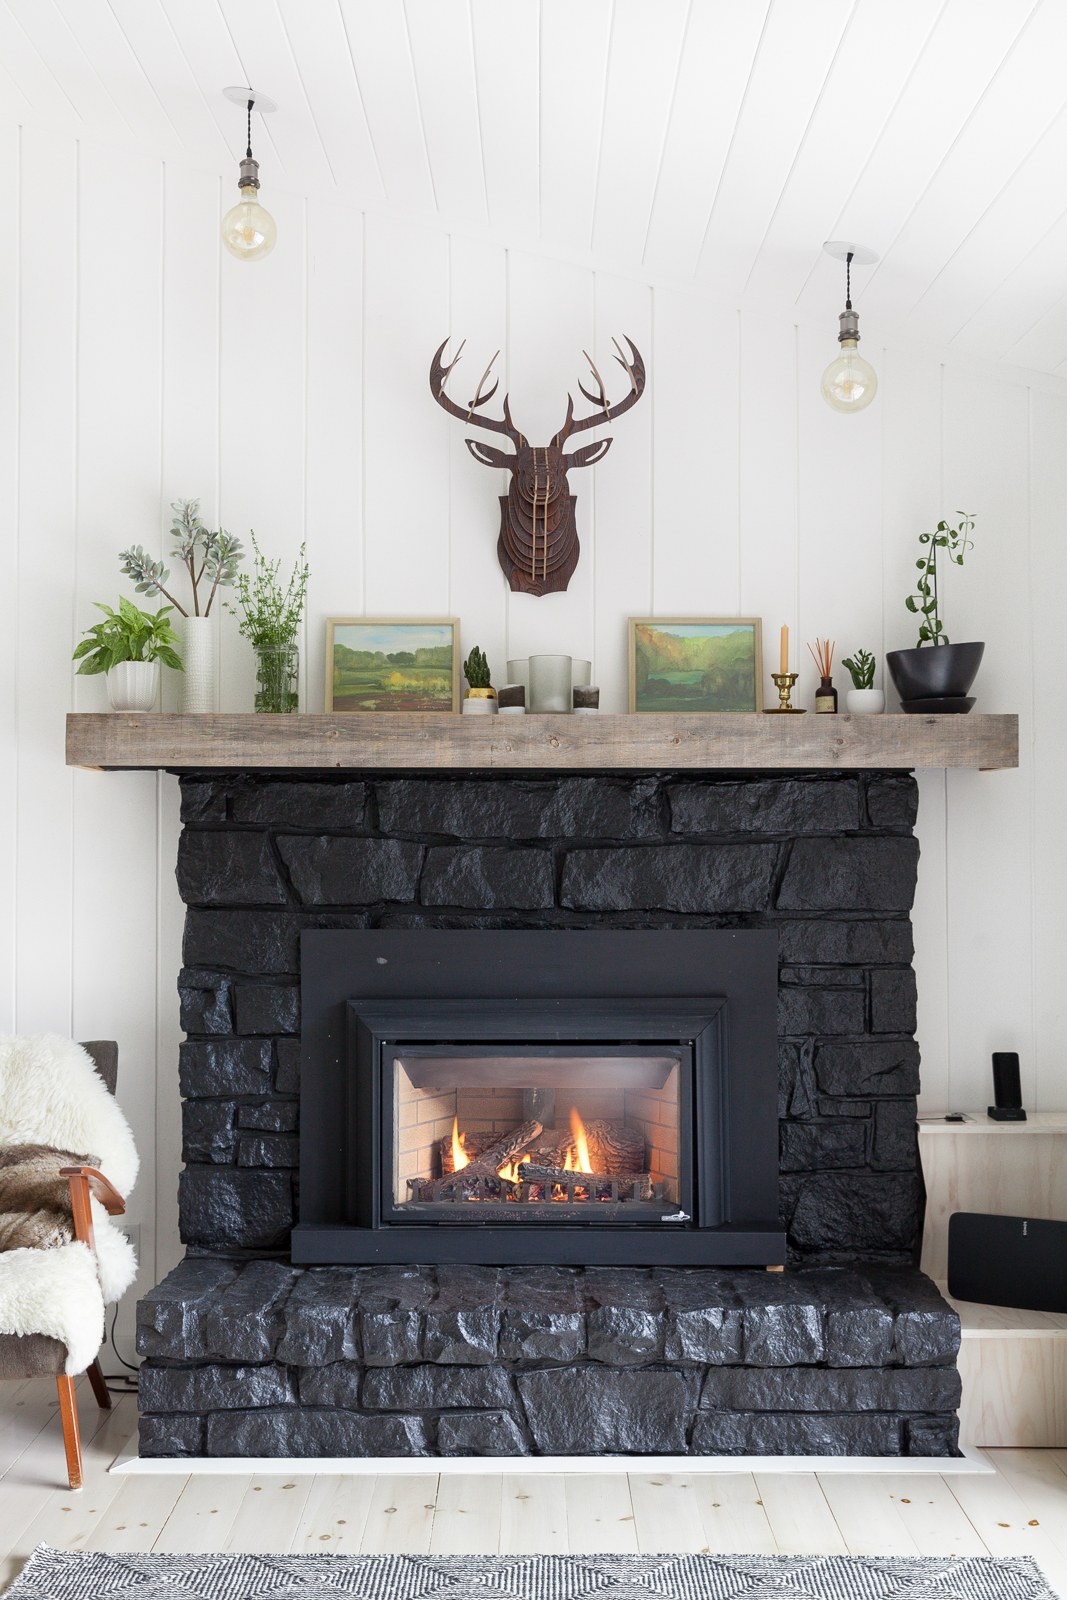 Rustic farmhouse living room with stone fireplace painted black for modern edge.